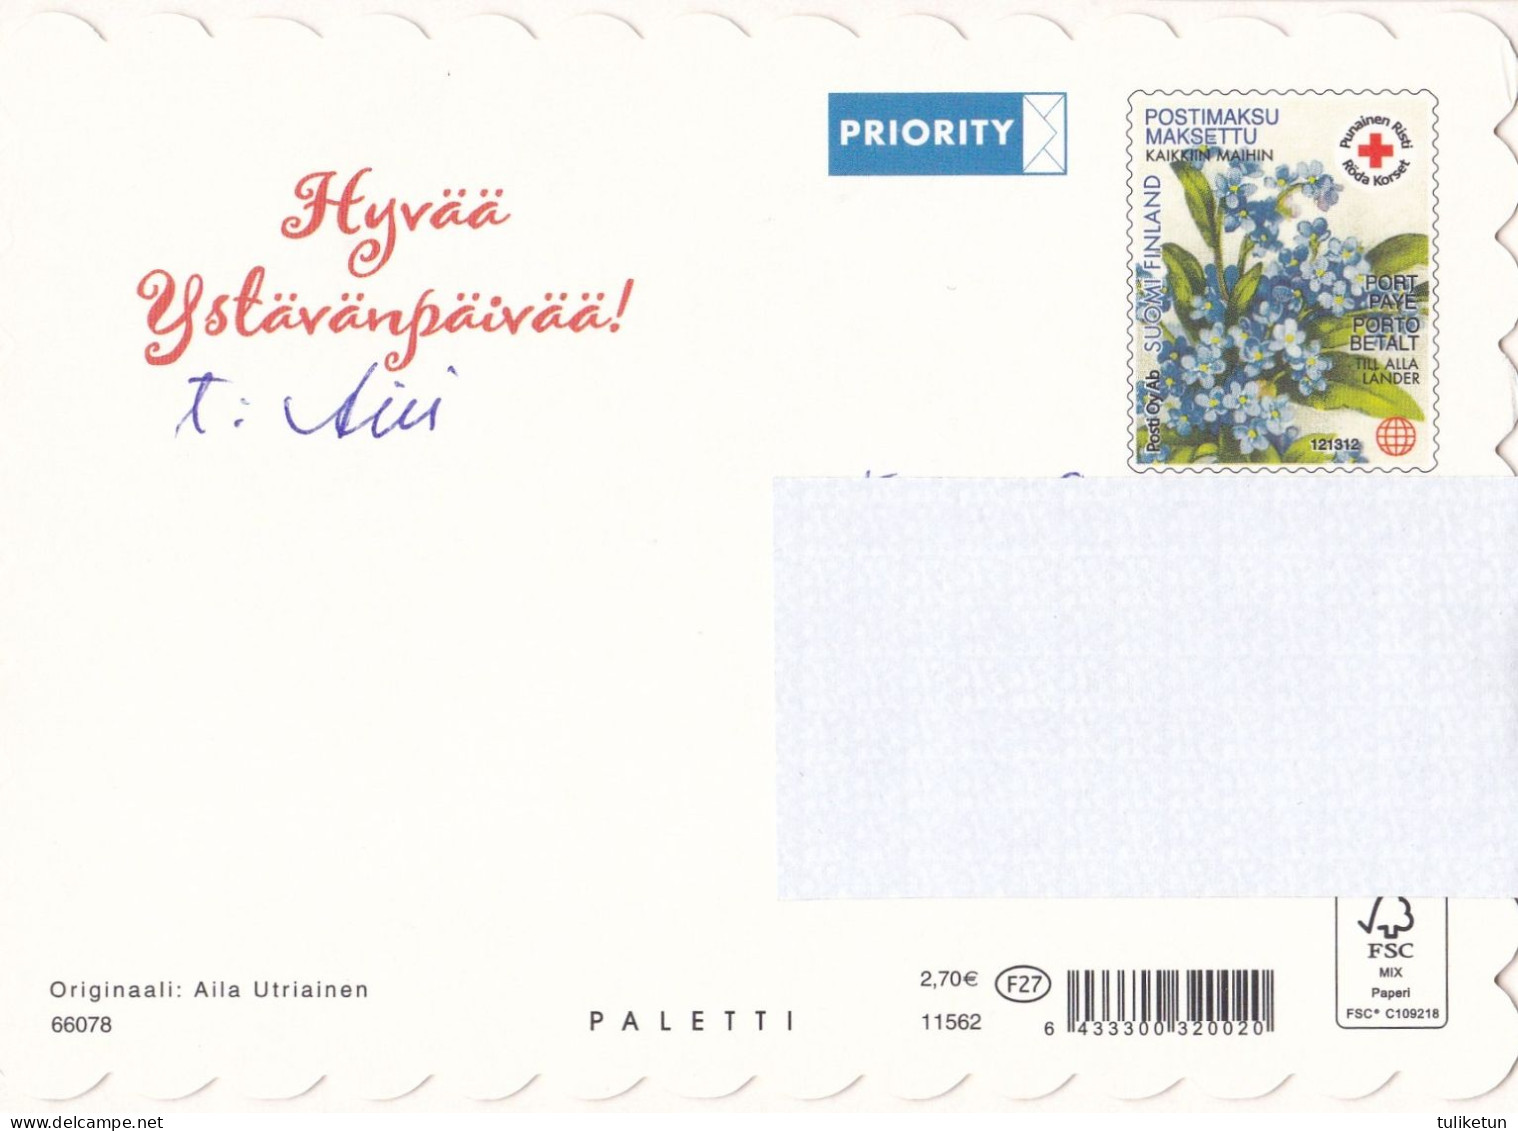 Postal Stationery - Valentine's Day - Teddy Bear Sitting With Roses - Red Cross - Suomi Finland - Postage Paid - Ganzsachen